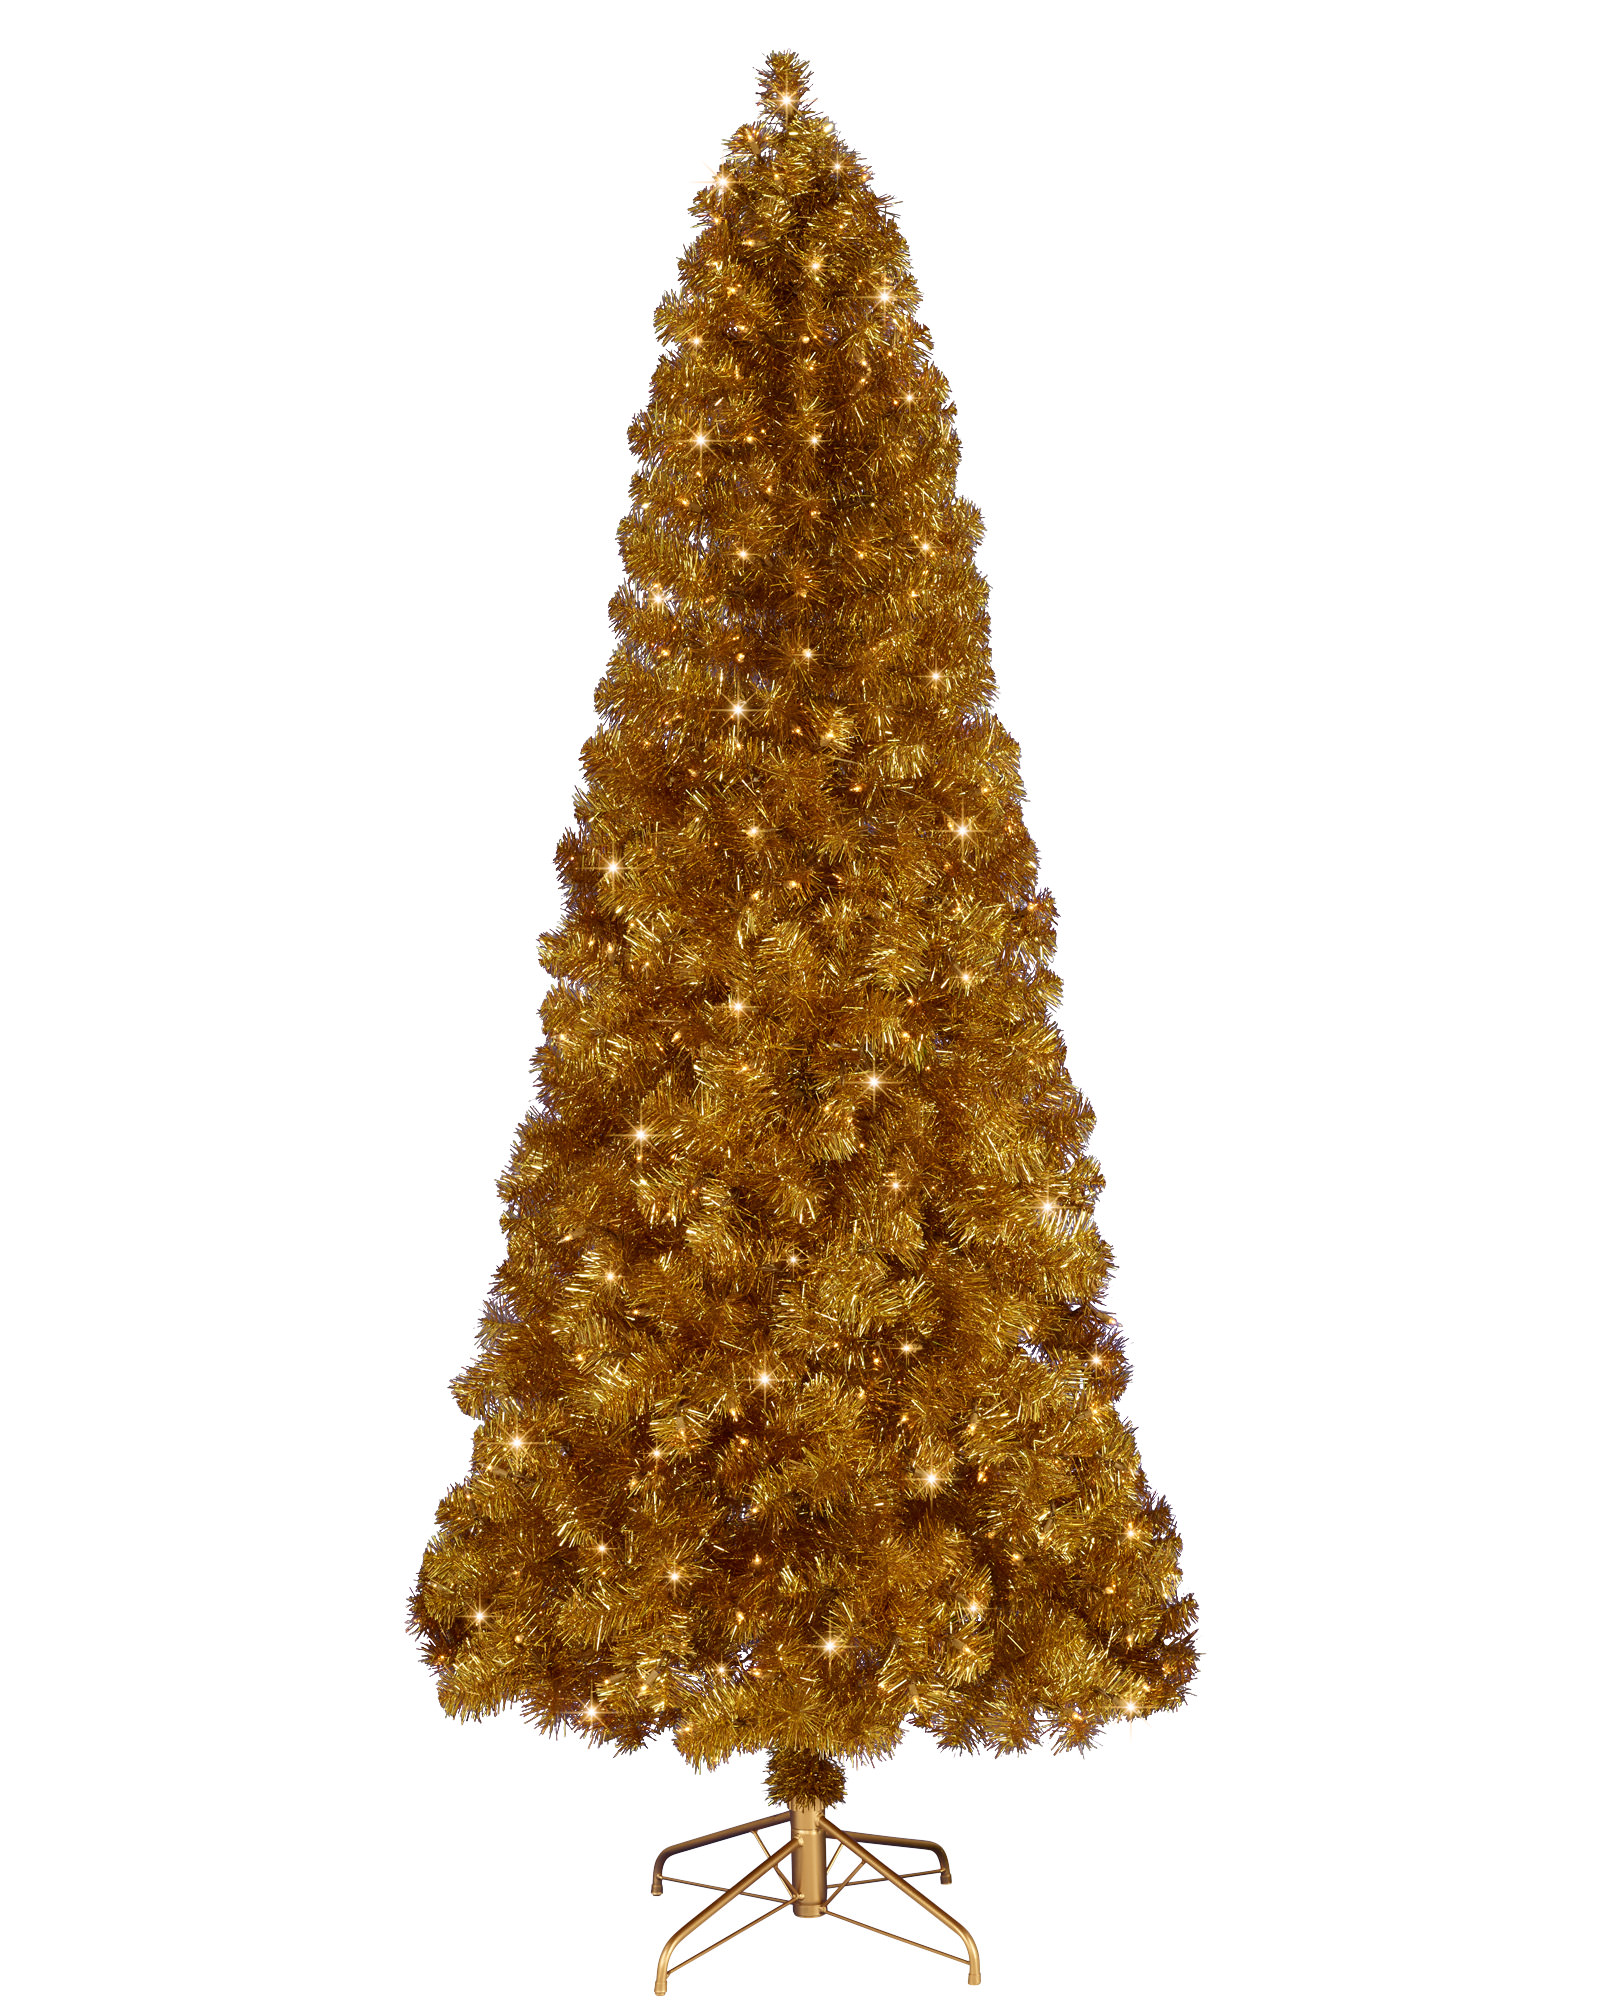 40 Gold Christmas Tree Decorations Ideas For Coming Holiday Session ...